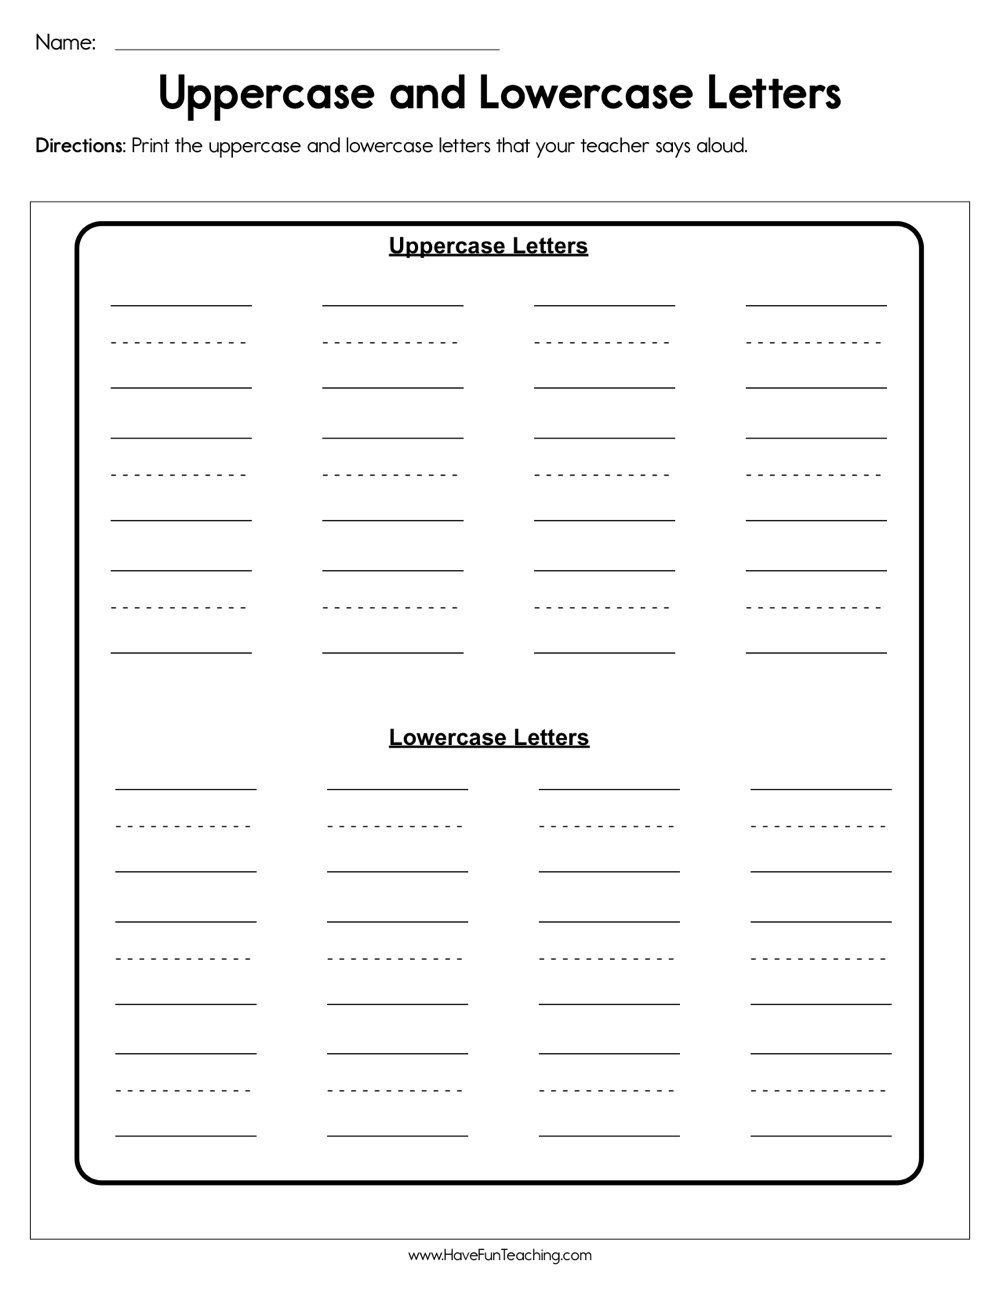 Uppercase And Lowercase Letters Worksheet intended for Upper And Lowercase Alphabet Worksheets